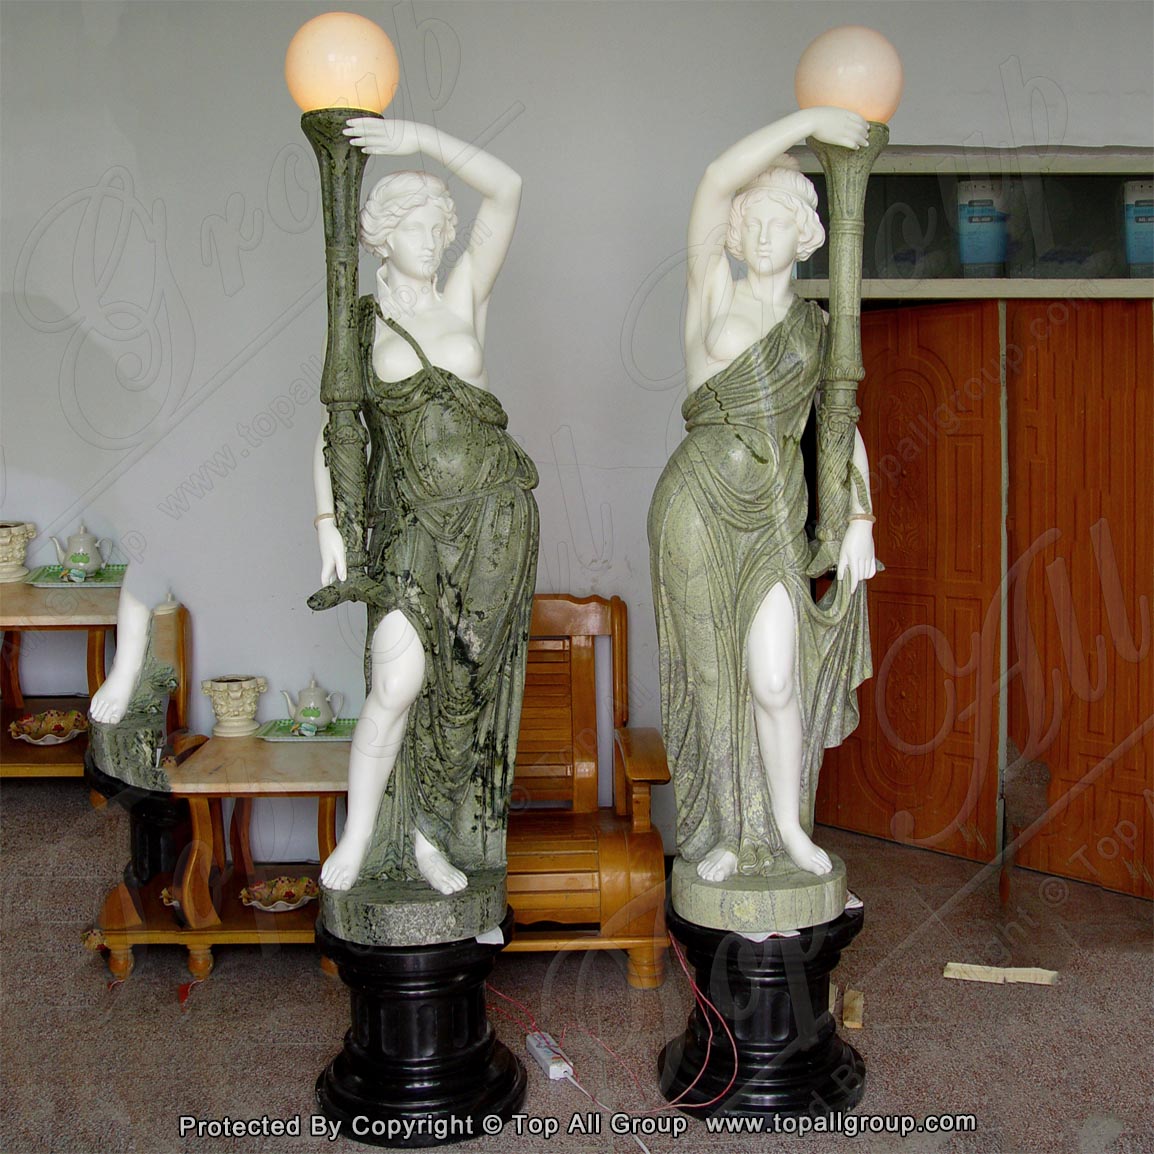 Best Price for Black Ball Fountain - Handcarved Decorative Marble Lady Statue Lamp  TALP-003 – Top All Group detail pictures